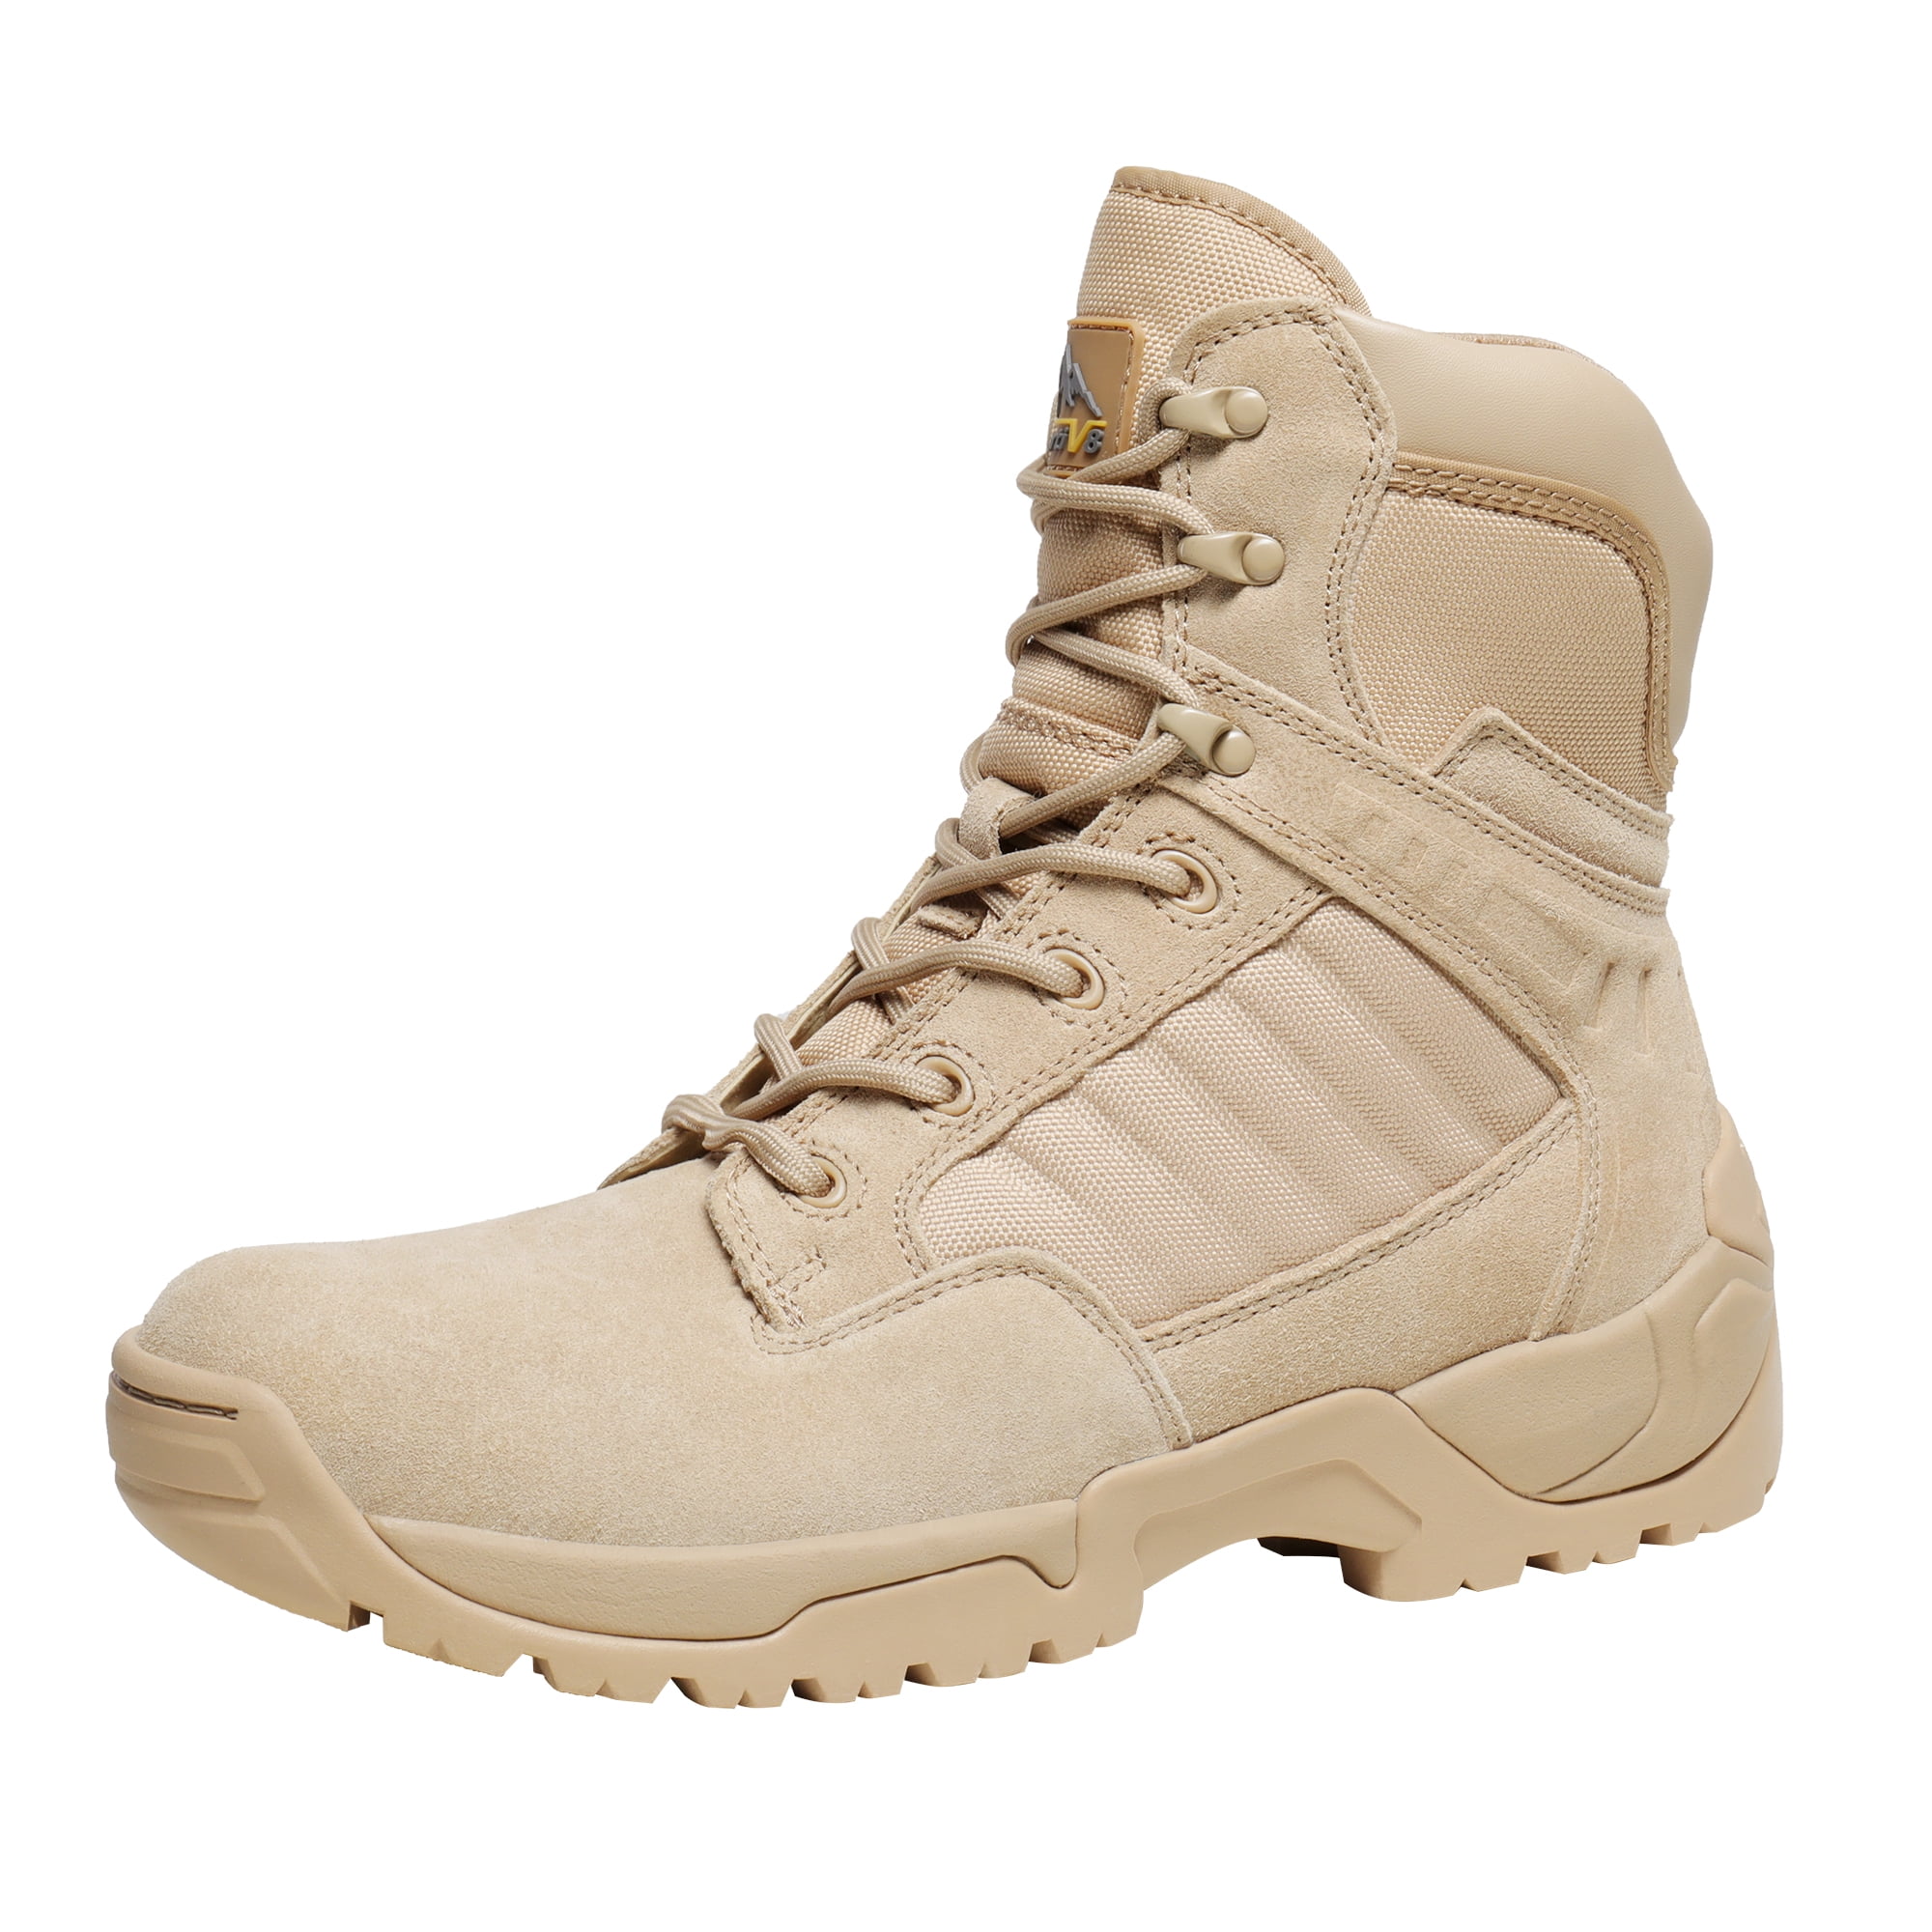 Smith & Wesson 11011 Men's Breach 2.0 8" Side-Zip Tactical Boots Coyote 12 